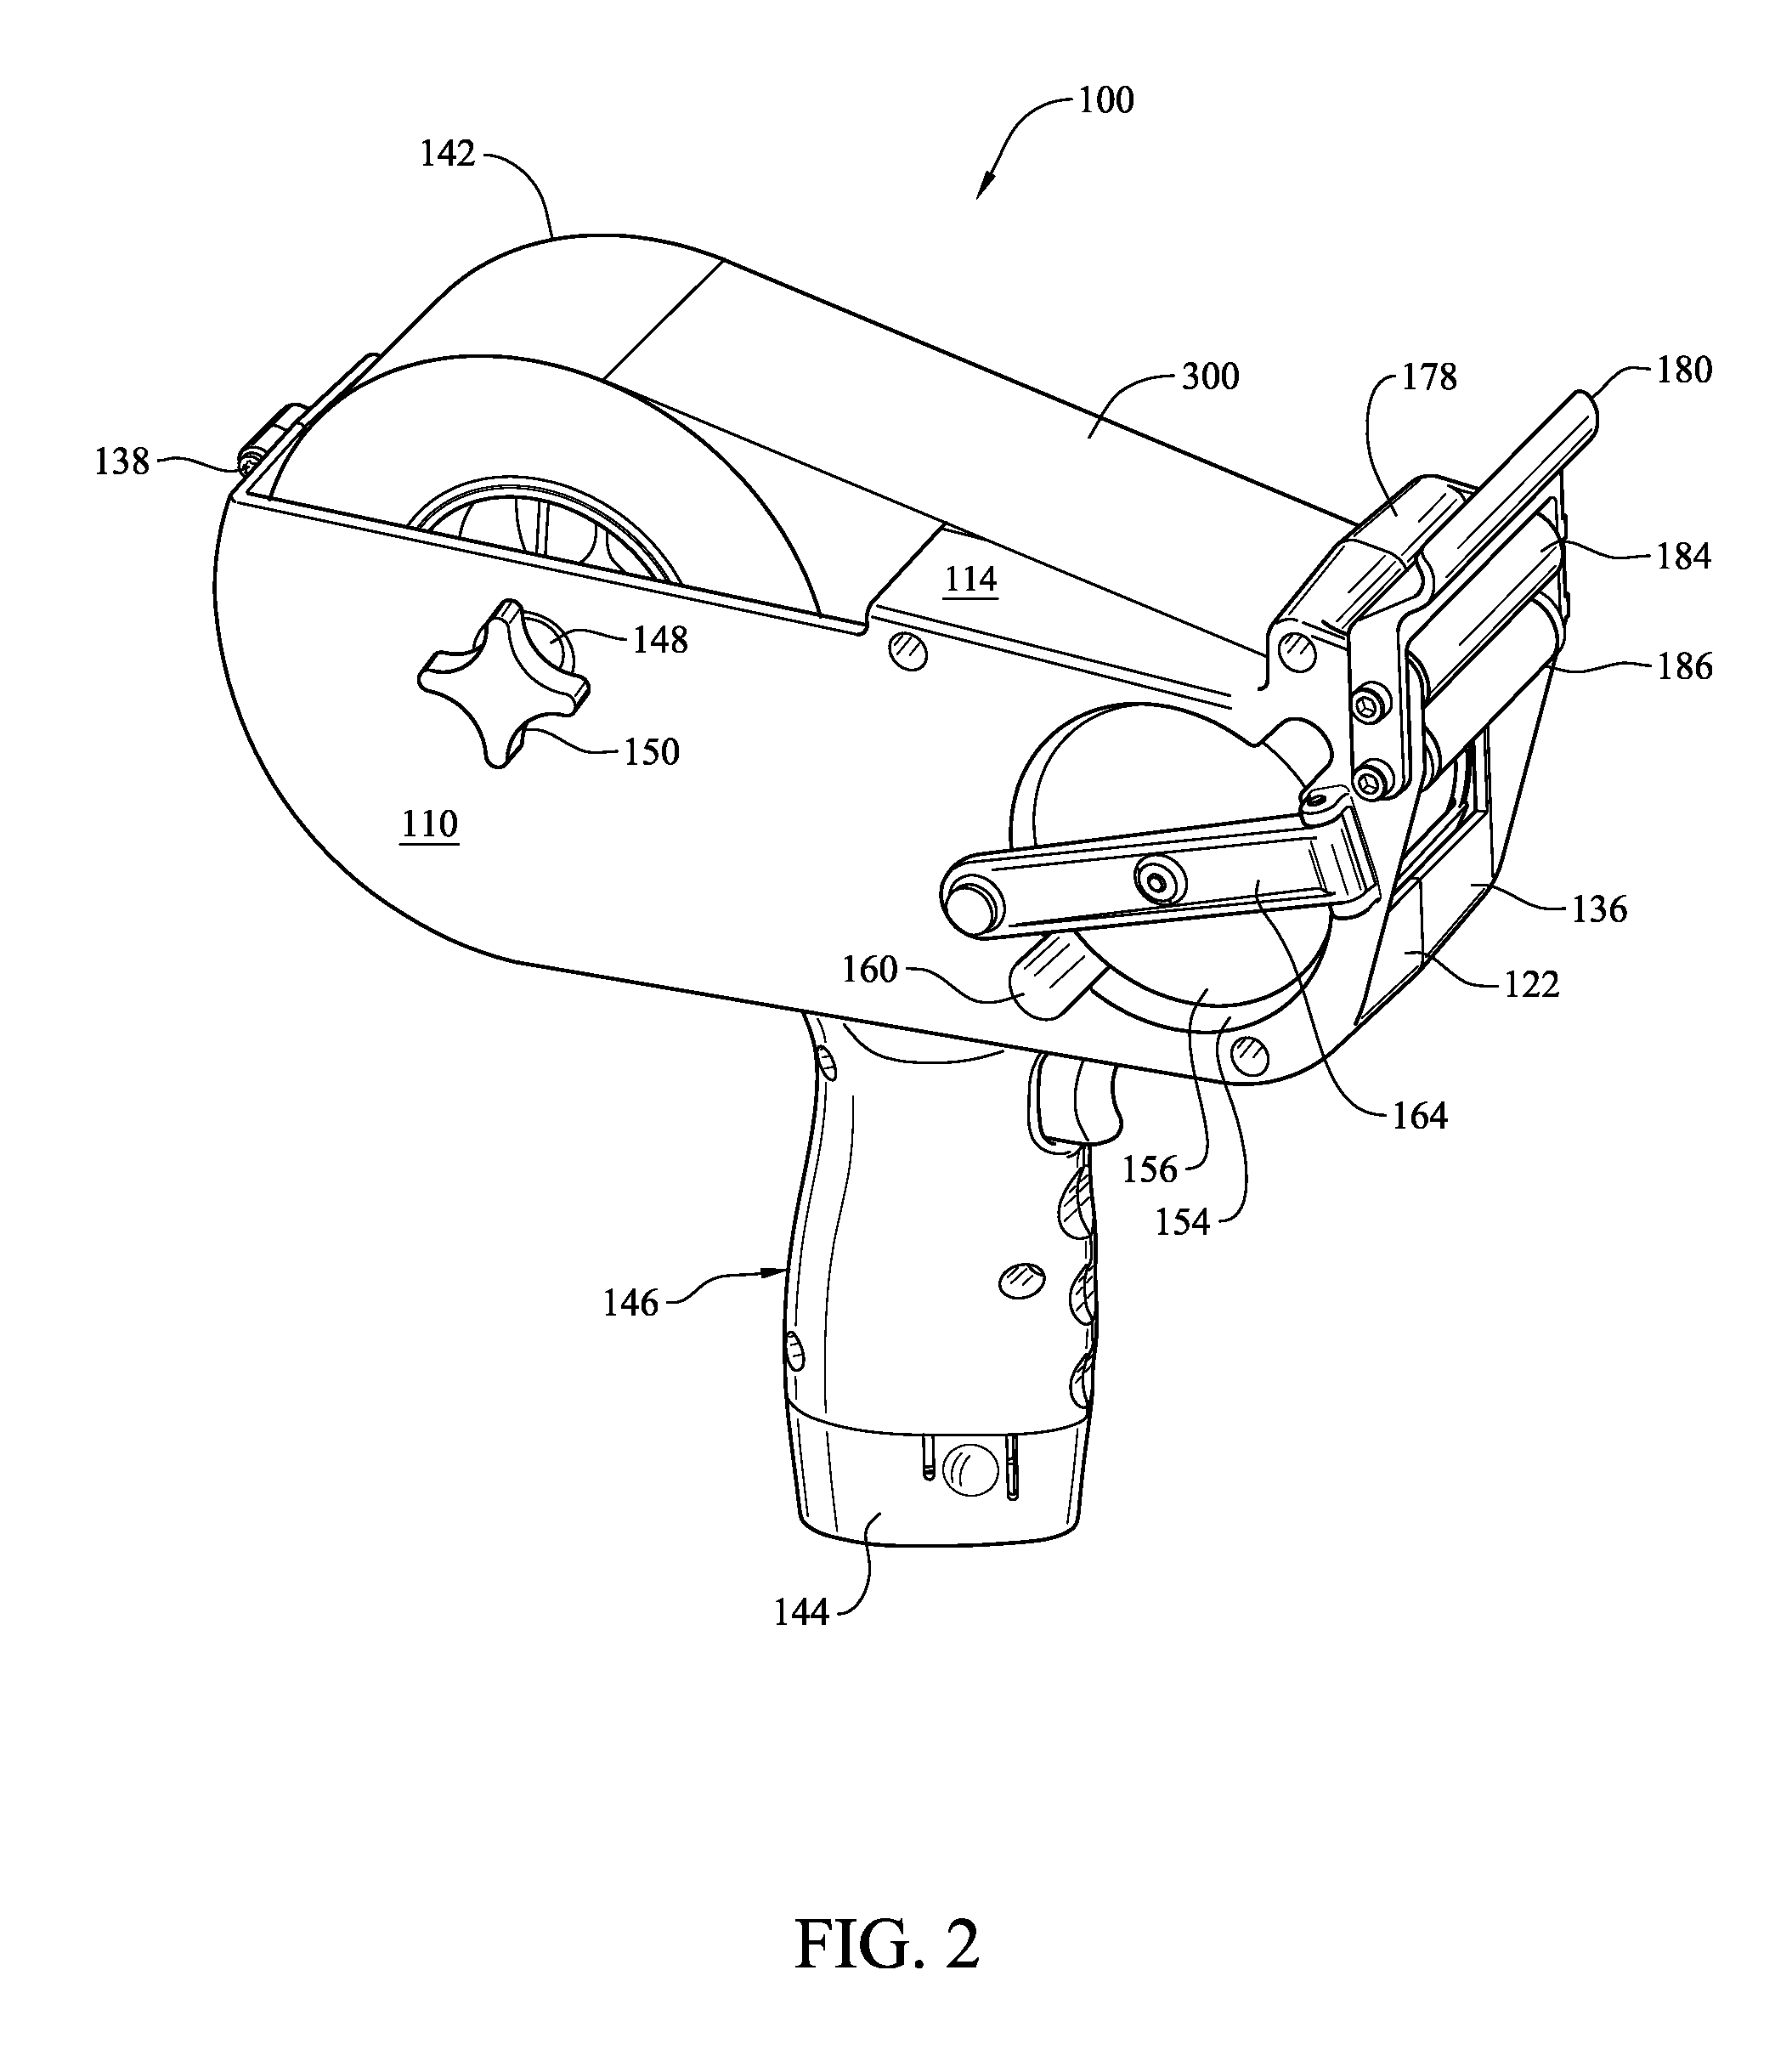 Adhesive tape dispenser with automatic winding of releasable backing